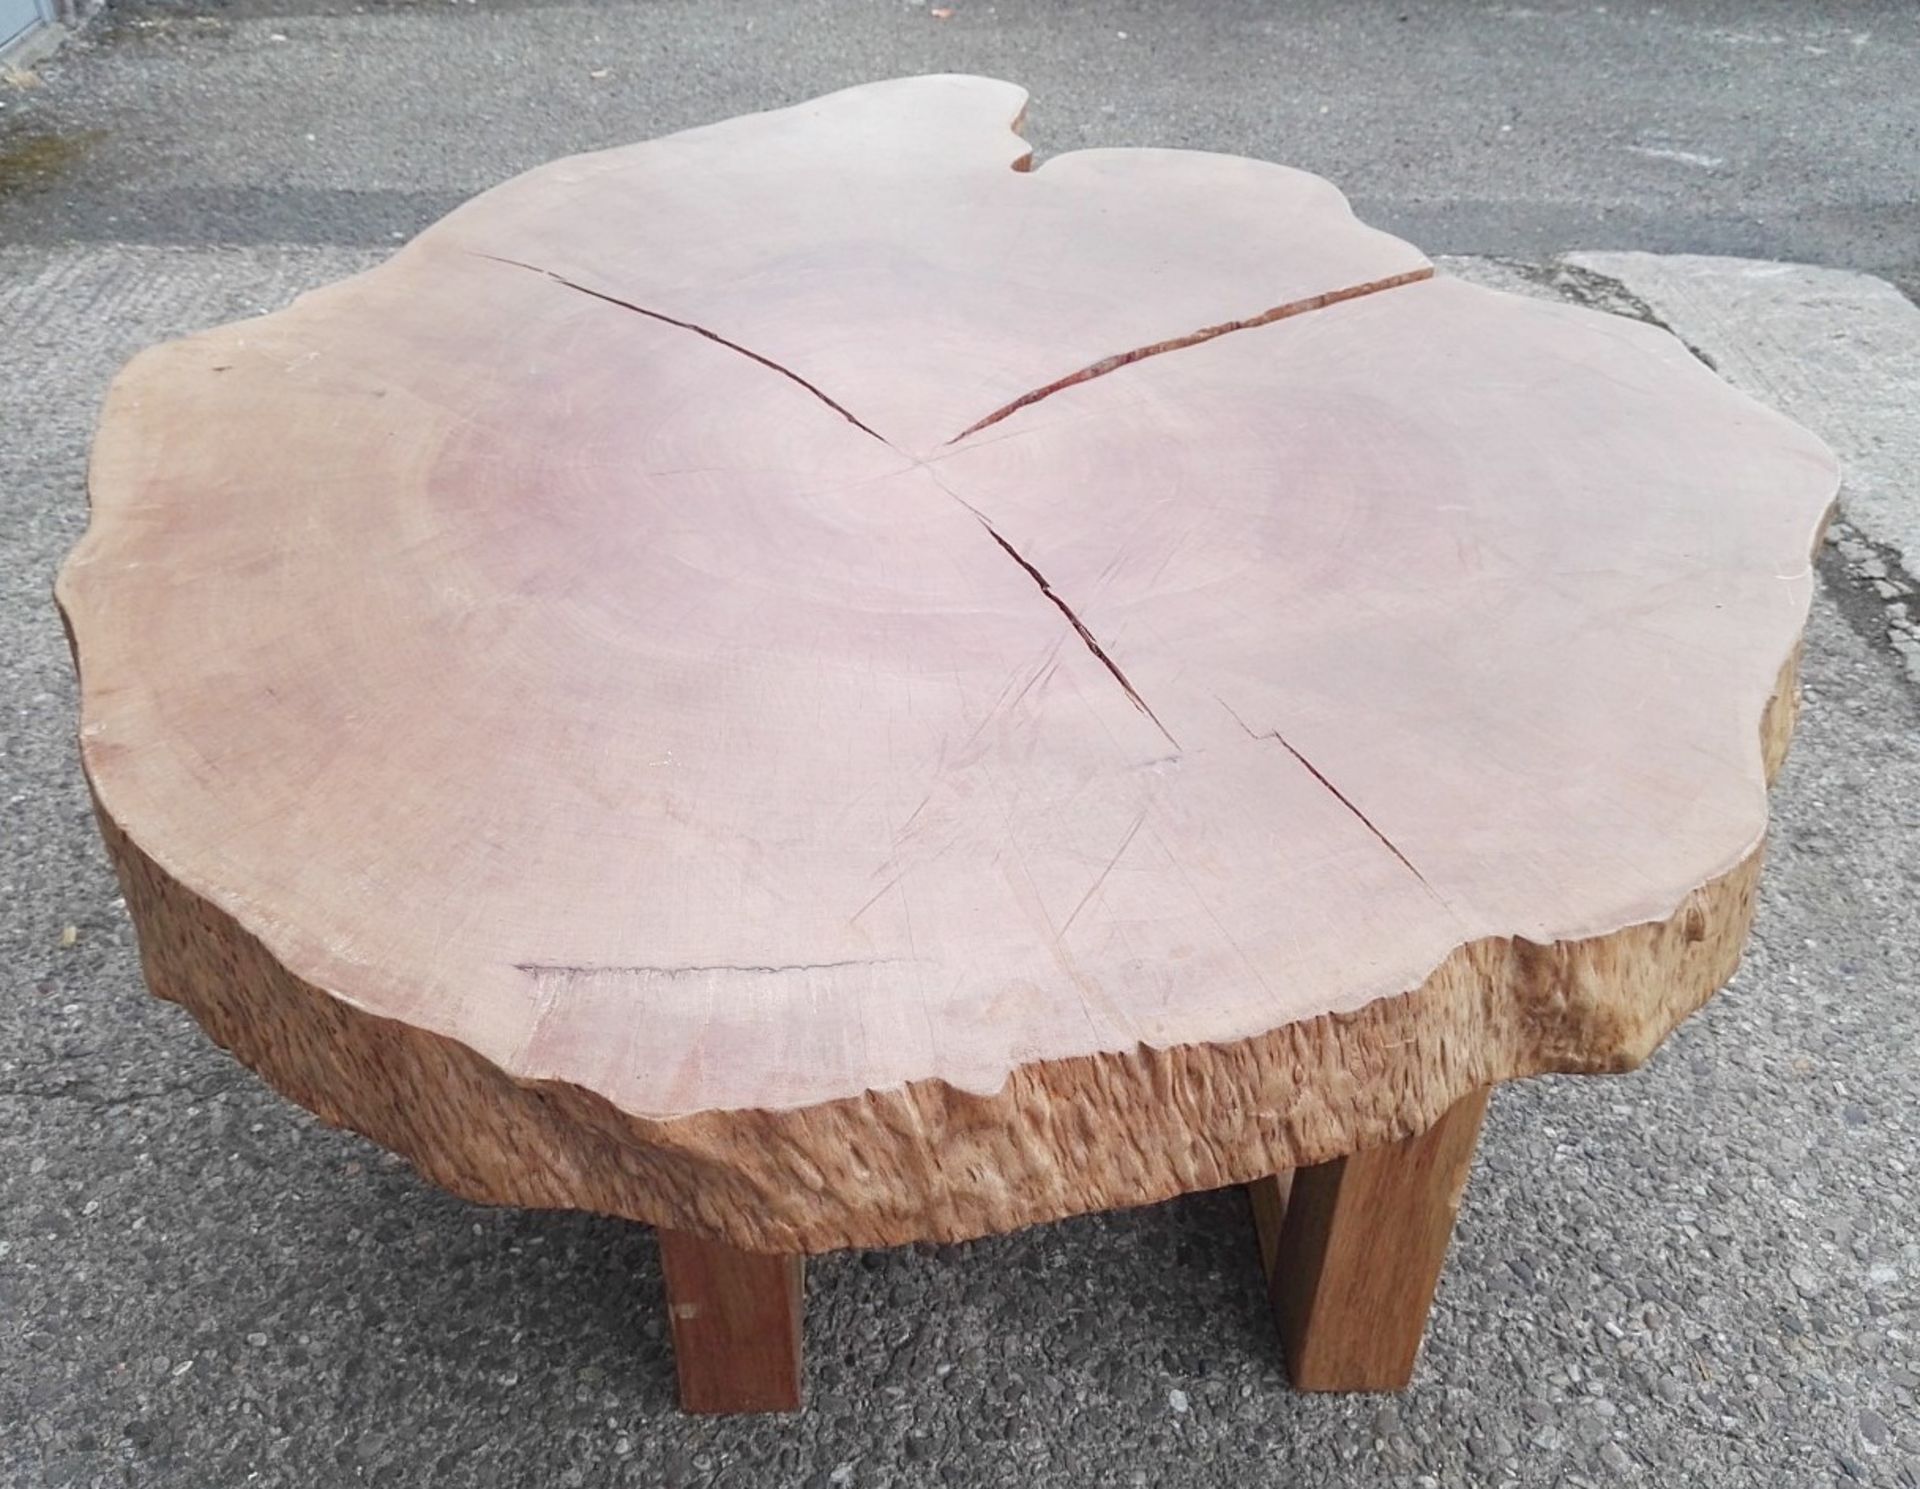 1 x Unique Reclaimed Solid Tree Trunk Coffee Table - Dimensions (approx): W152 x D129 x H63.3cm - Image 2 of 6